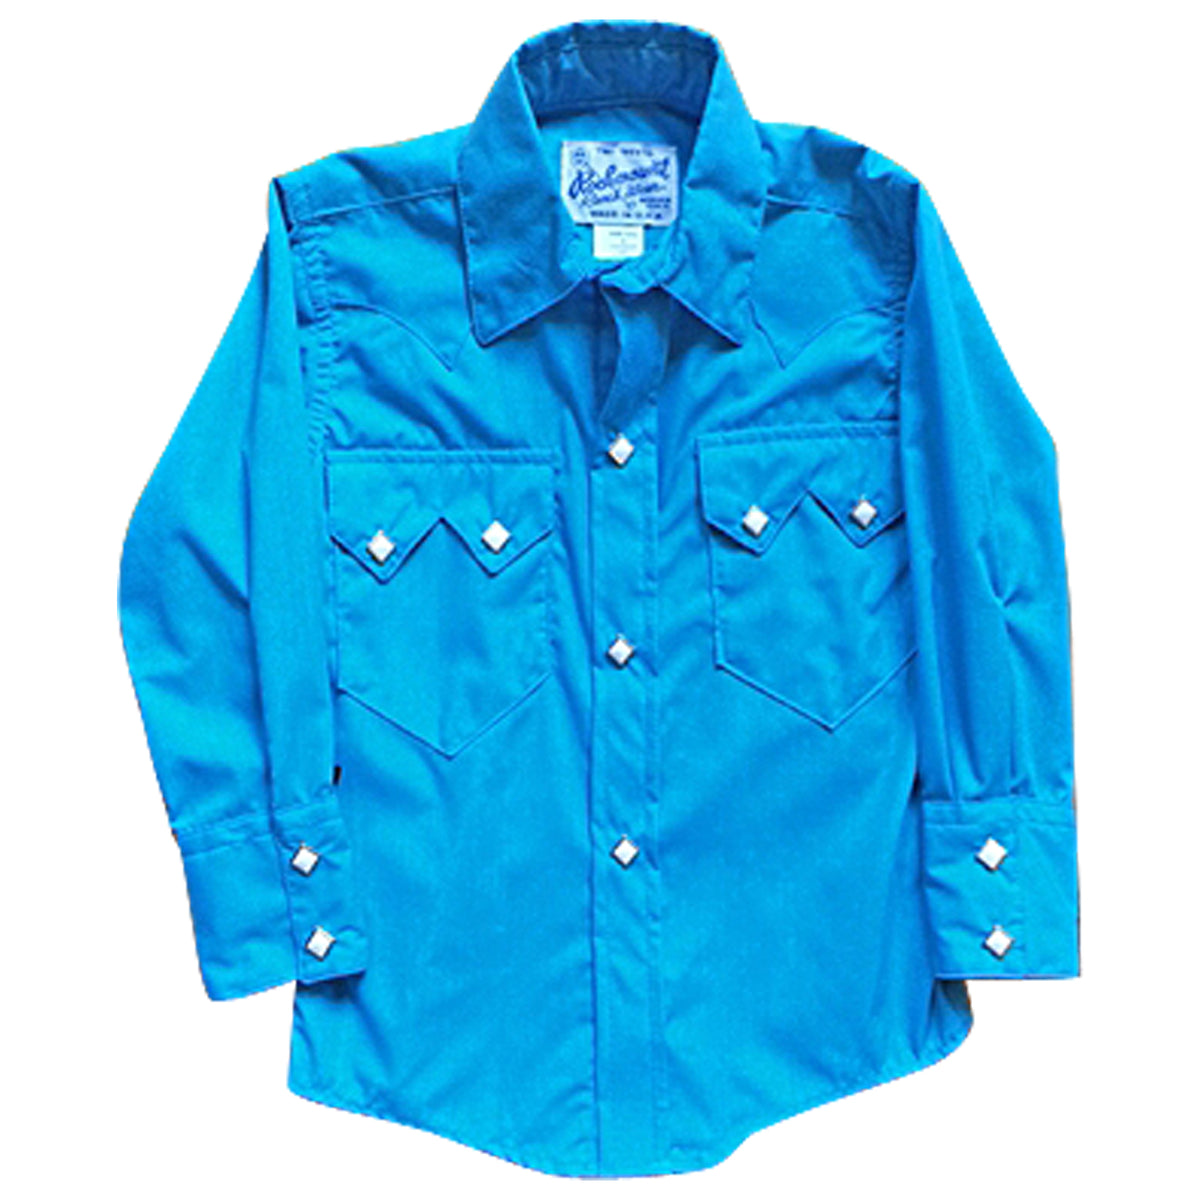 Kid's Youth Vintage Solid Turquoise Western Shirt - Rockmount